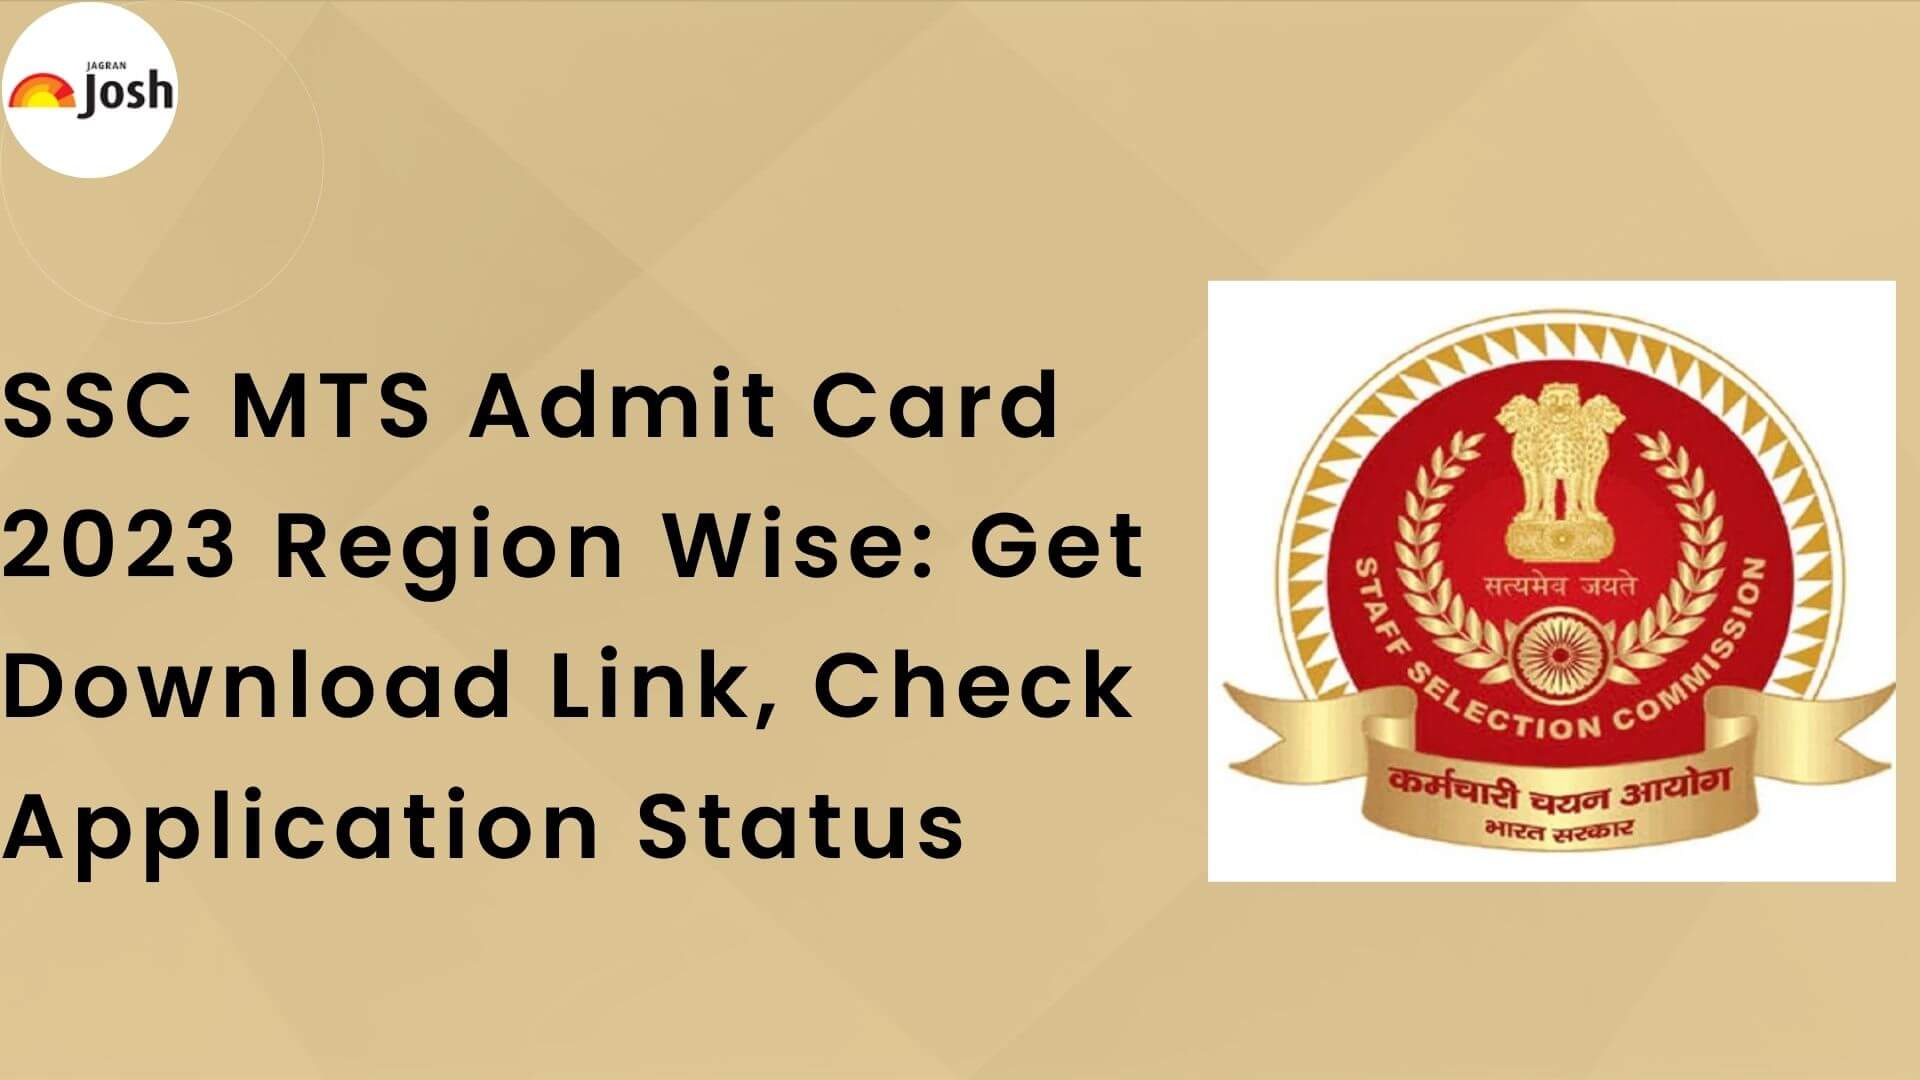 SSC MTS Admit Card 2023 Download Link Tier 1 Hall Ticket Link Here